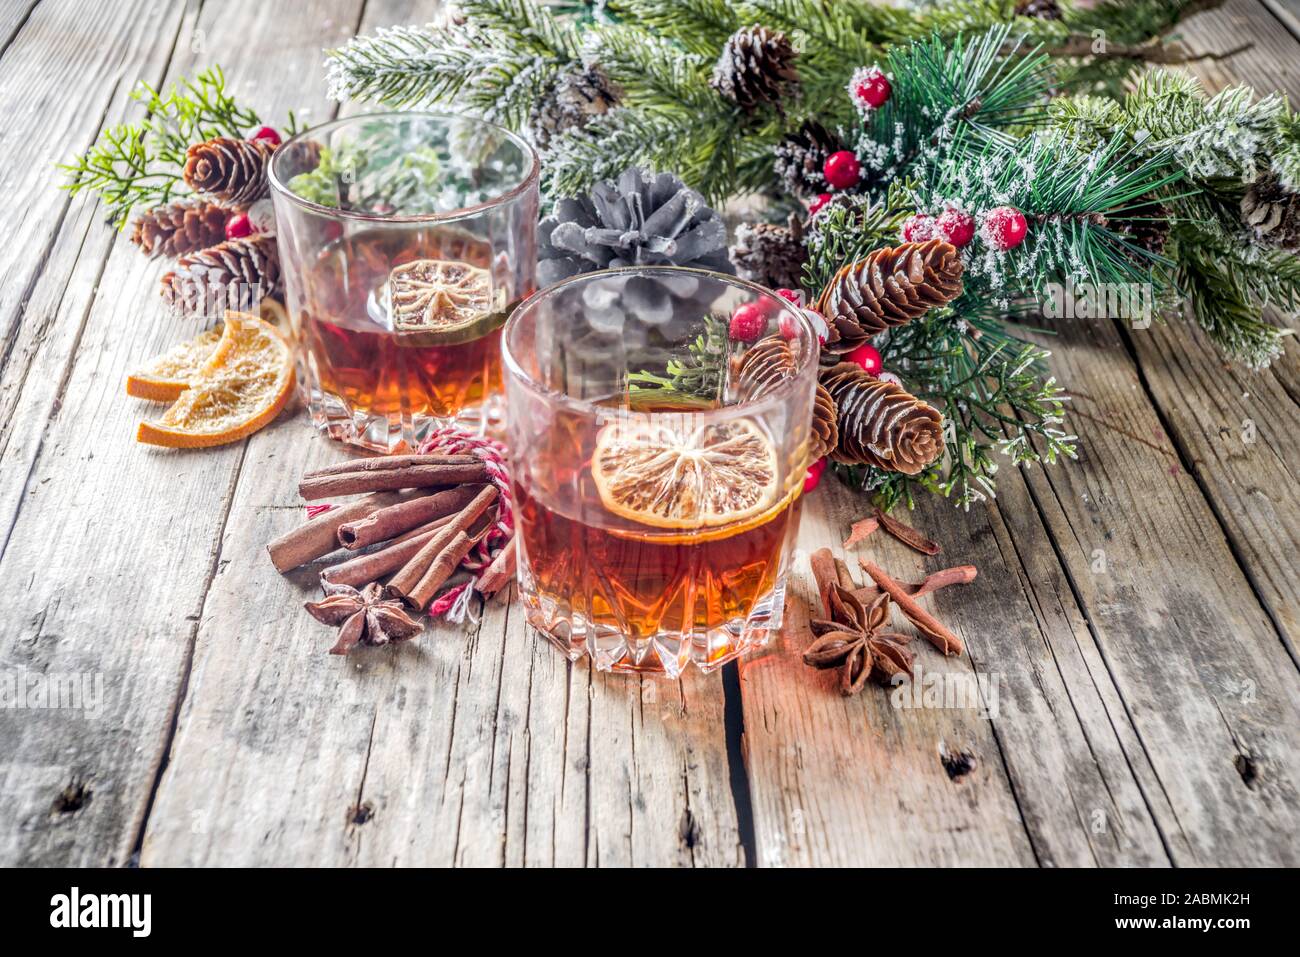 Christmas Winter Alcohol Drink Orange Spice And Bourbon Whiskey Alcoholic Cocktail In Two Glasses Wooden Background With Christmas Tree Branches An Stock Photo Alamy